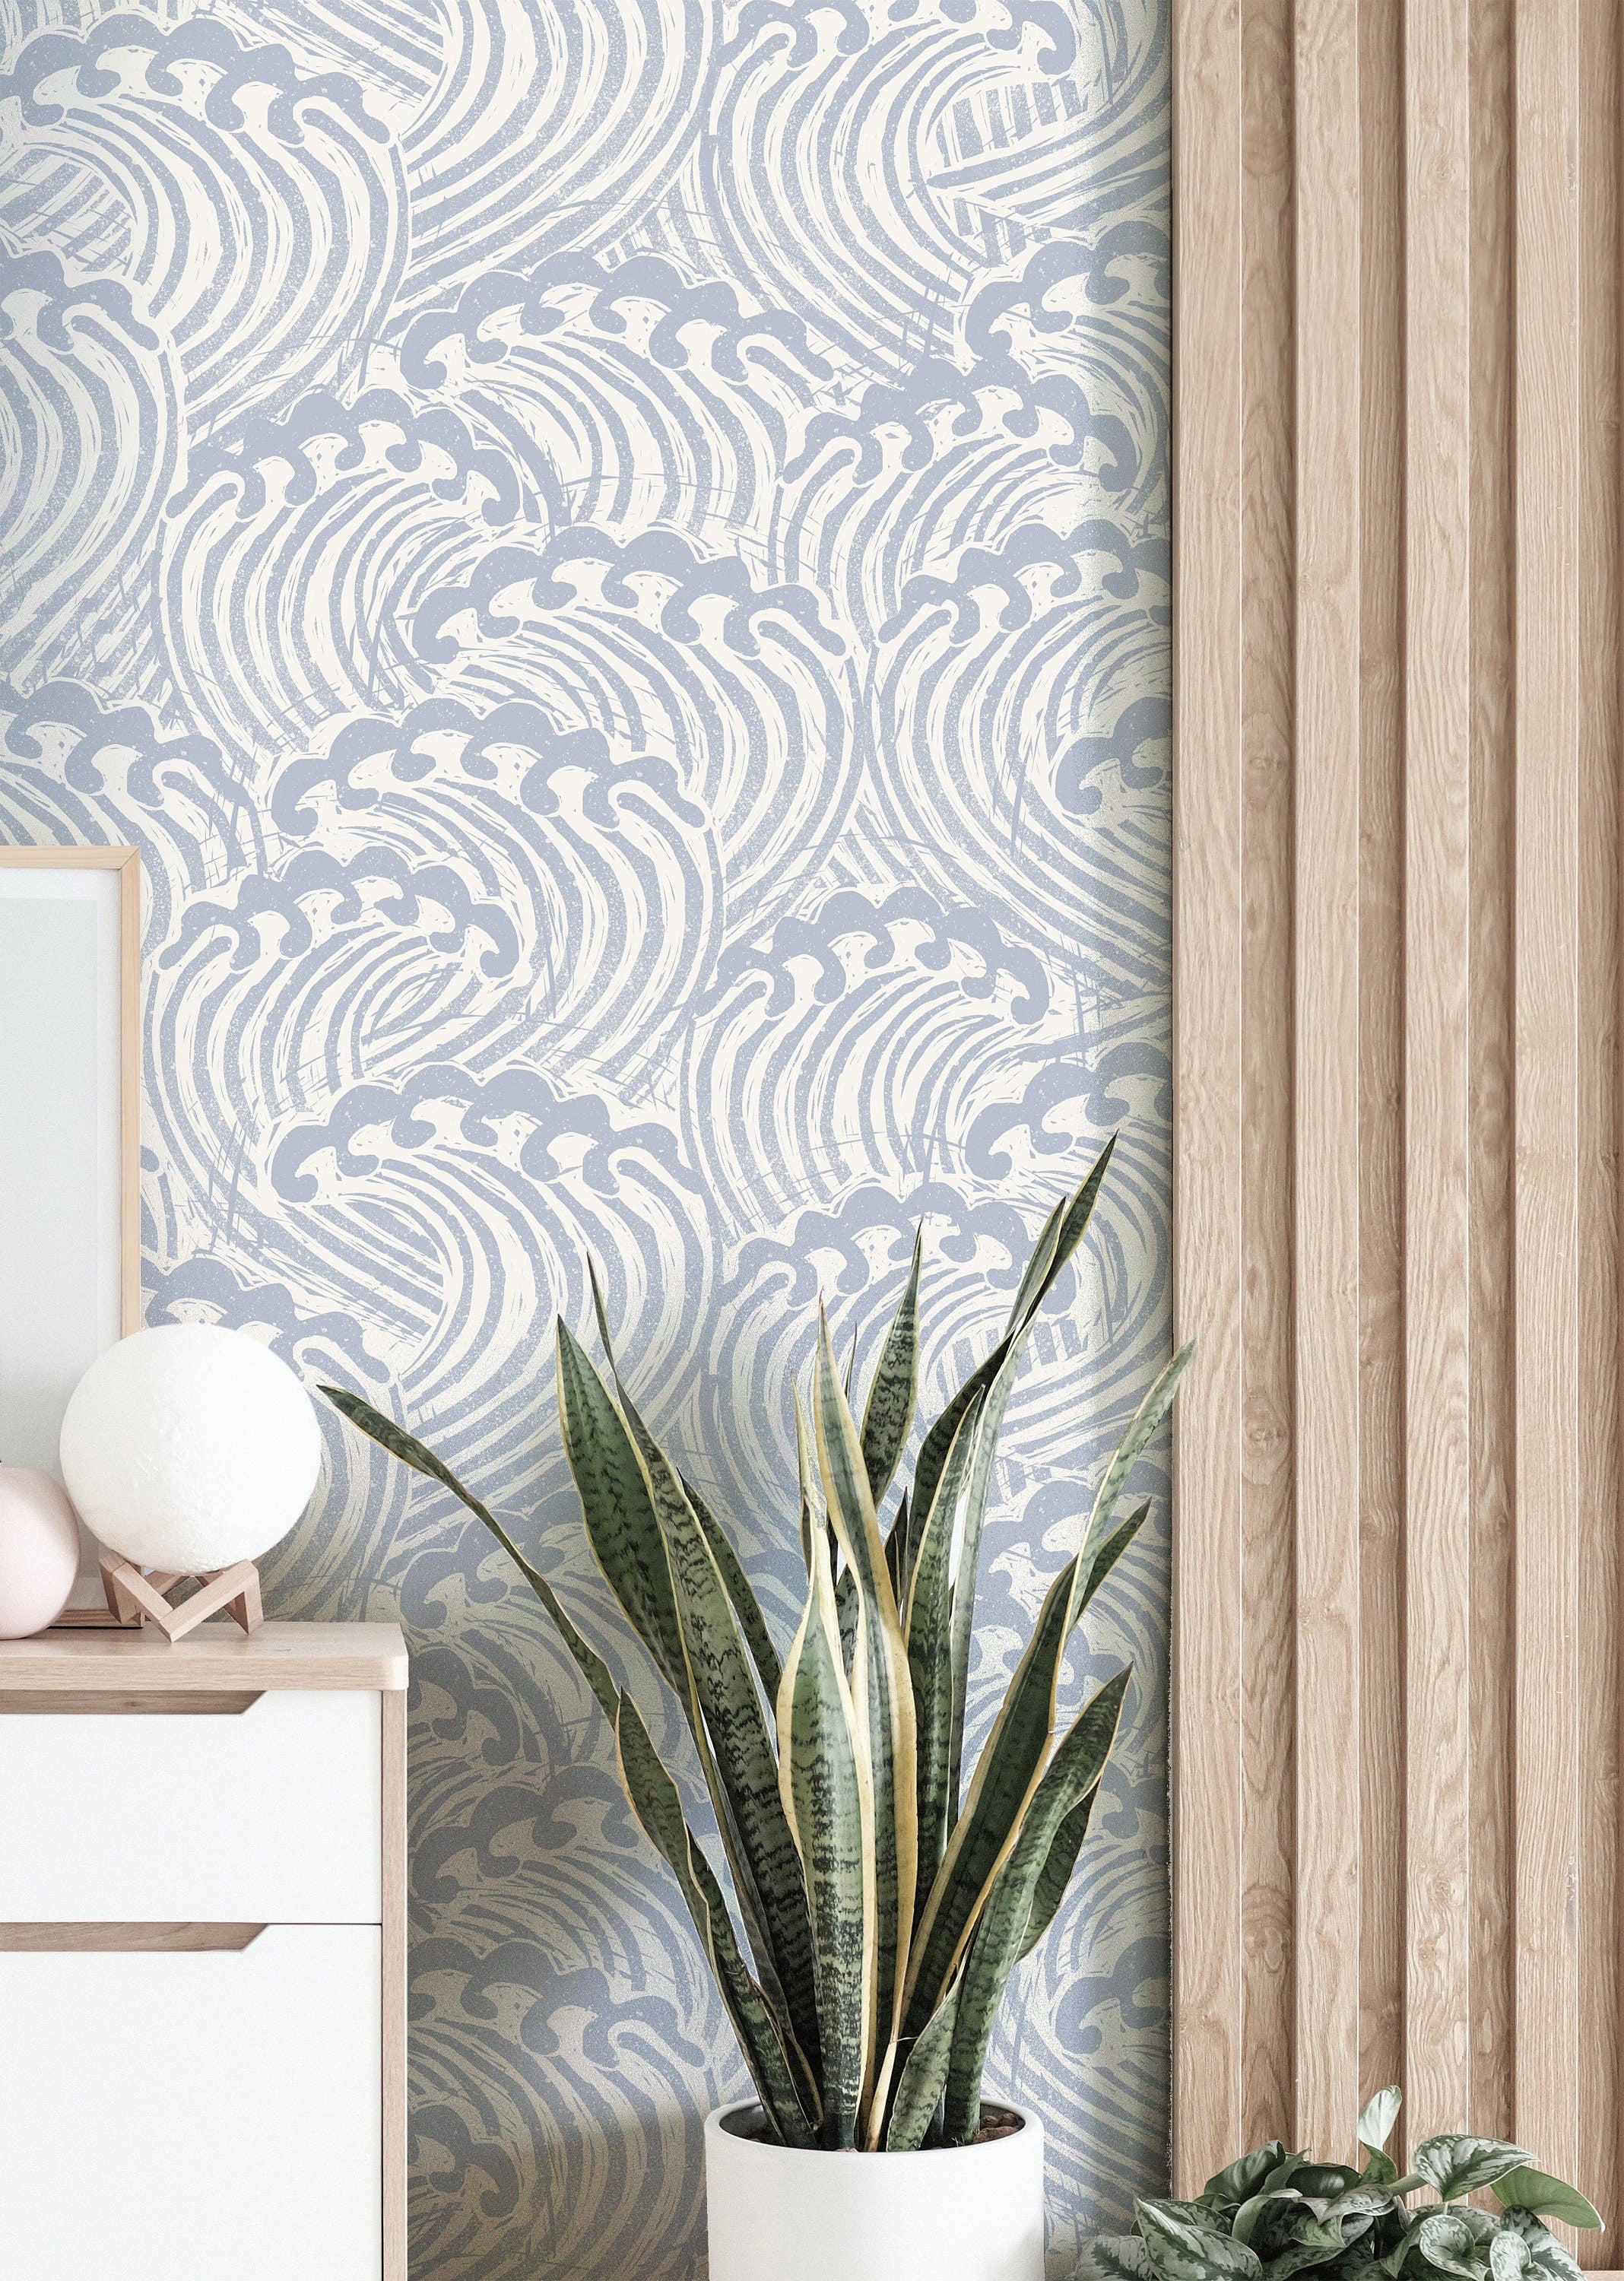 Wallpaper Peel and Stick Wallpaper Muted Blue White Crashing Waves Removable Wallpaper Wall Decor Home Decor Wall Art Room Decor 3750 - JamesAndColors